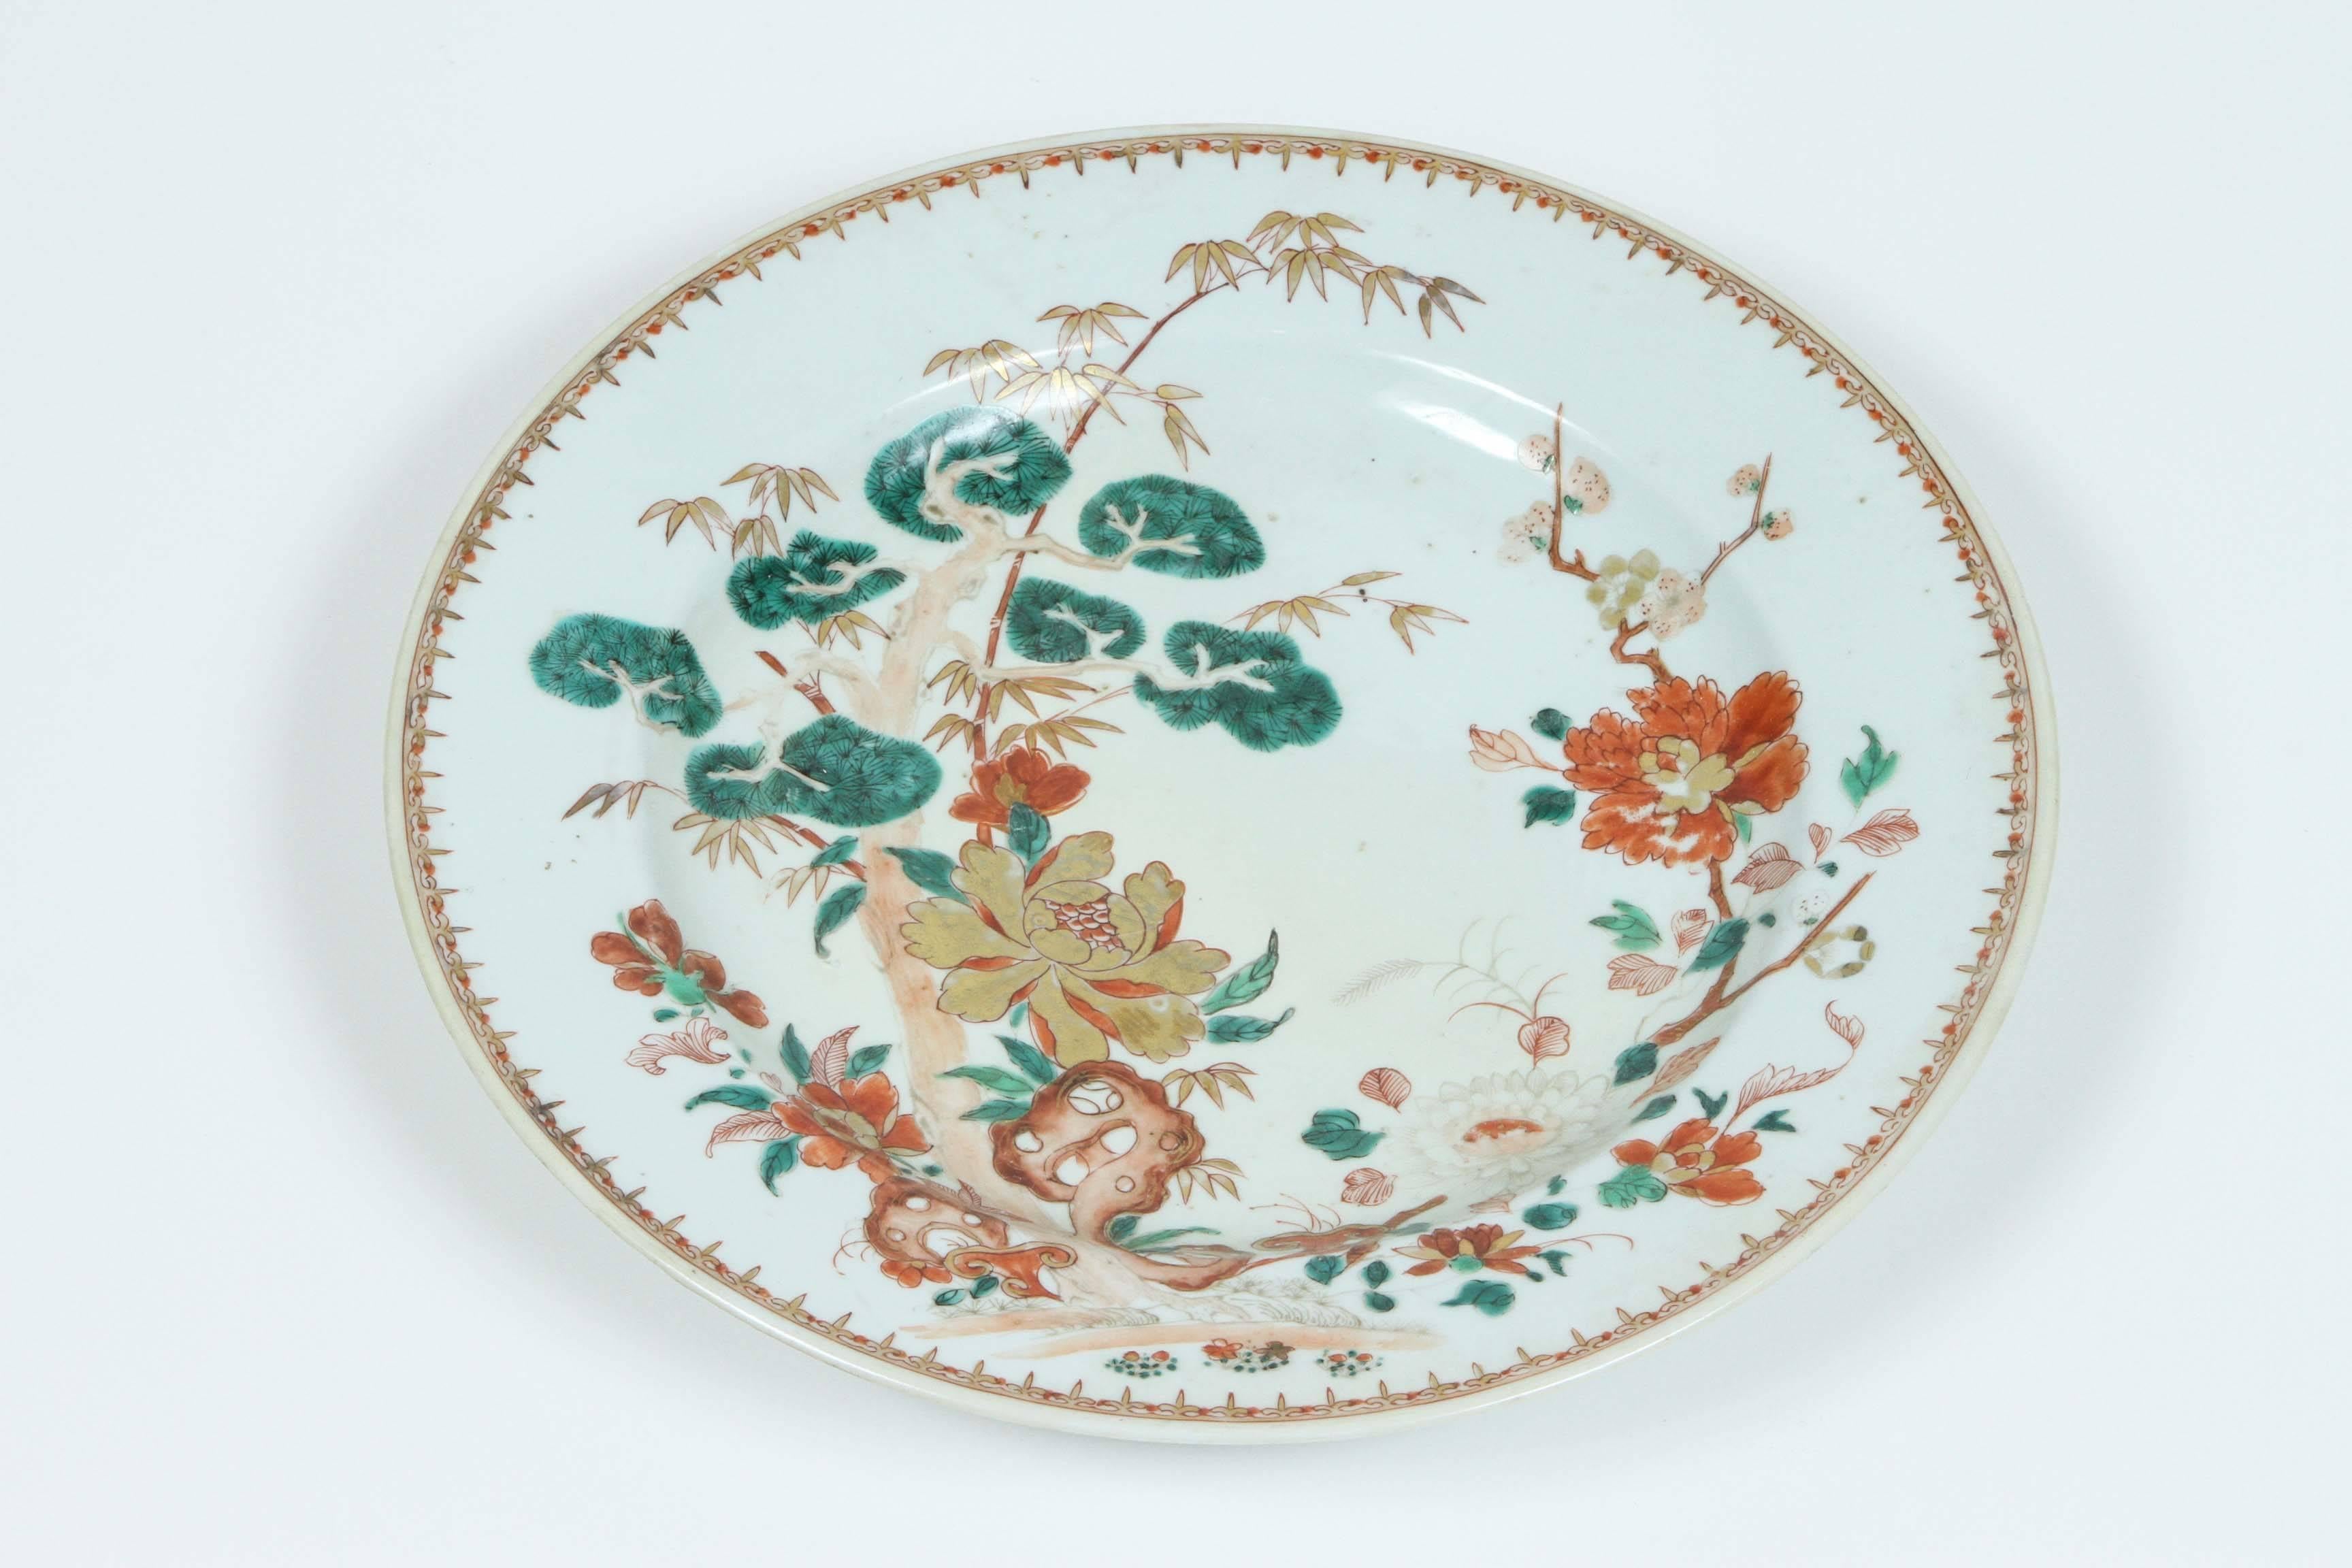 An 18th century Chinese export porcelain charger or shallow bowl decorated with beautiful floral motifs and gilt highlights.
              